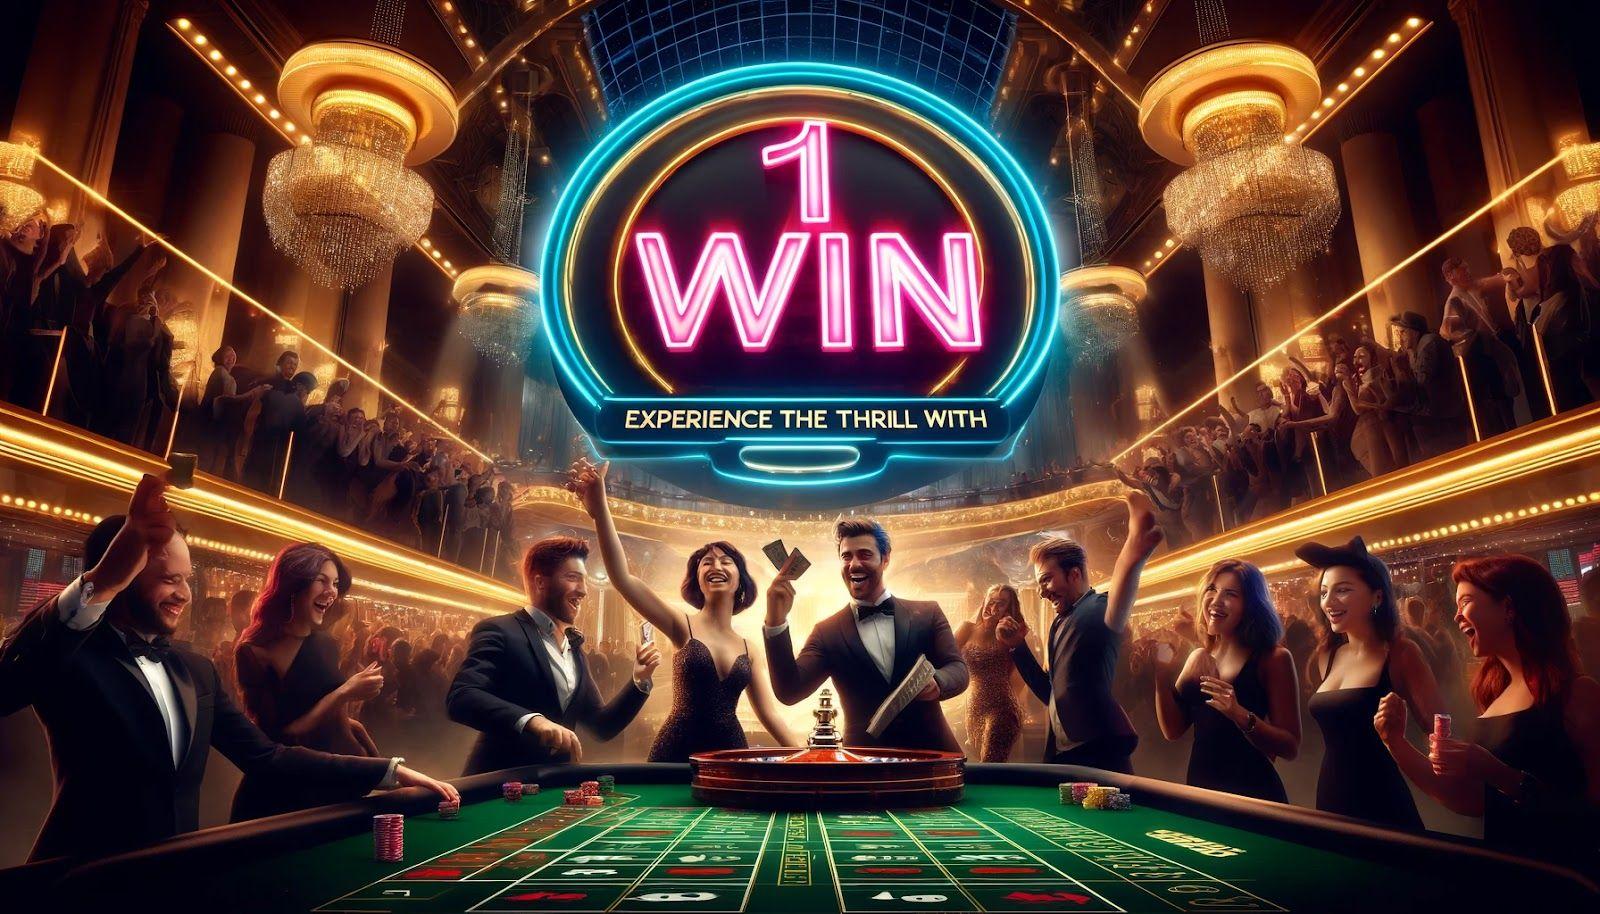 1Win's favourite online gambling site, the history of 1Win